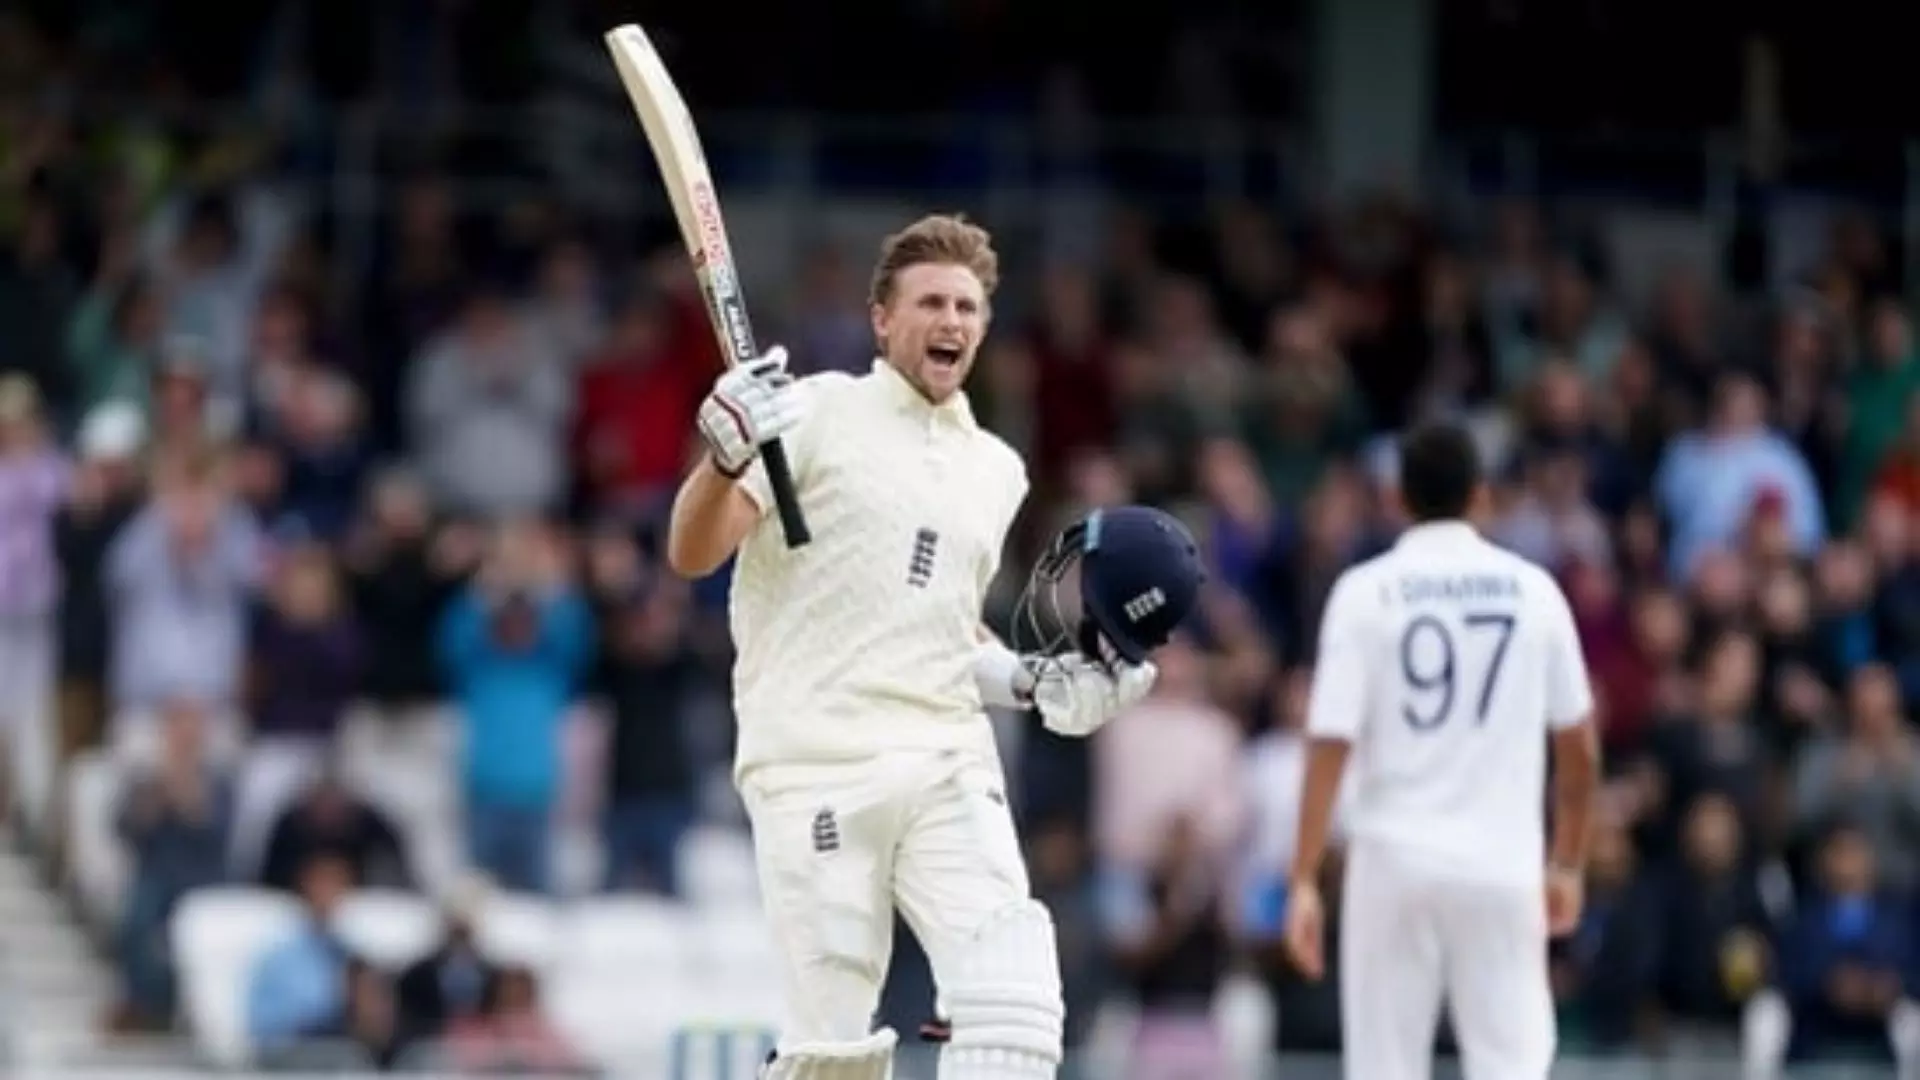 India Vs England Third Test Match England Team Scores 423 Runs Loss of 8 Wickets And Captain Joe Root Gets Century